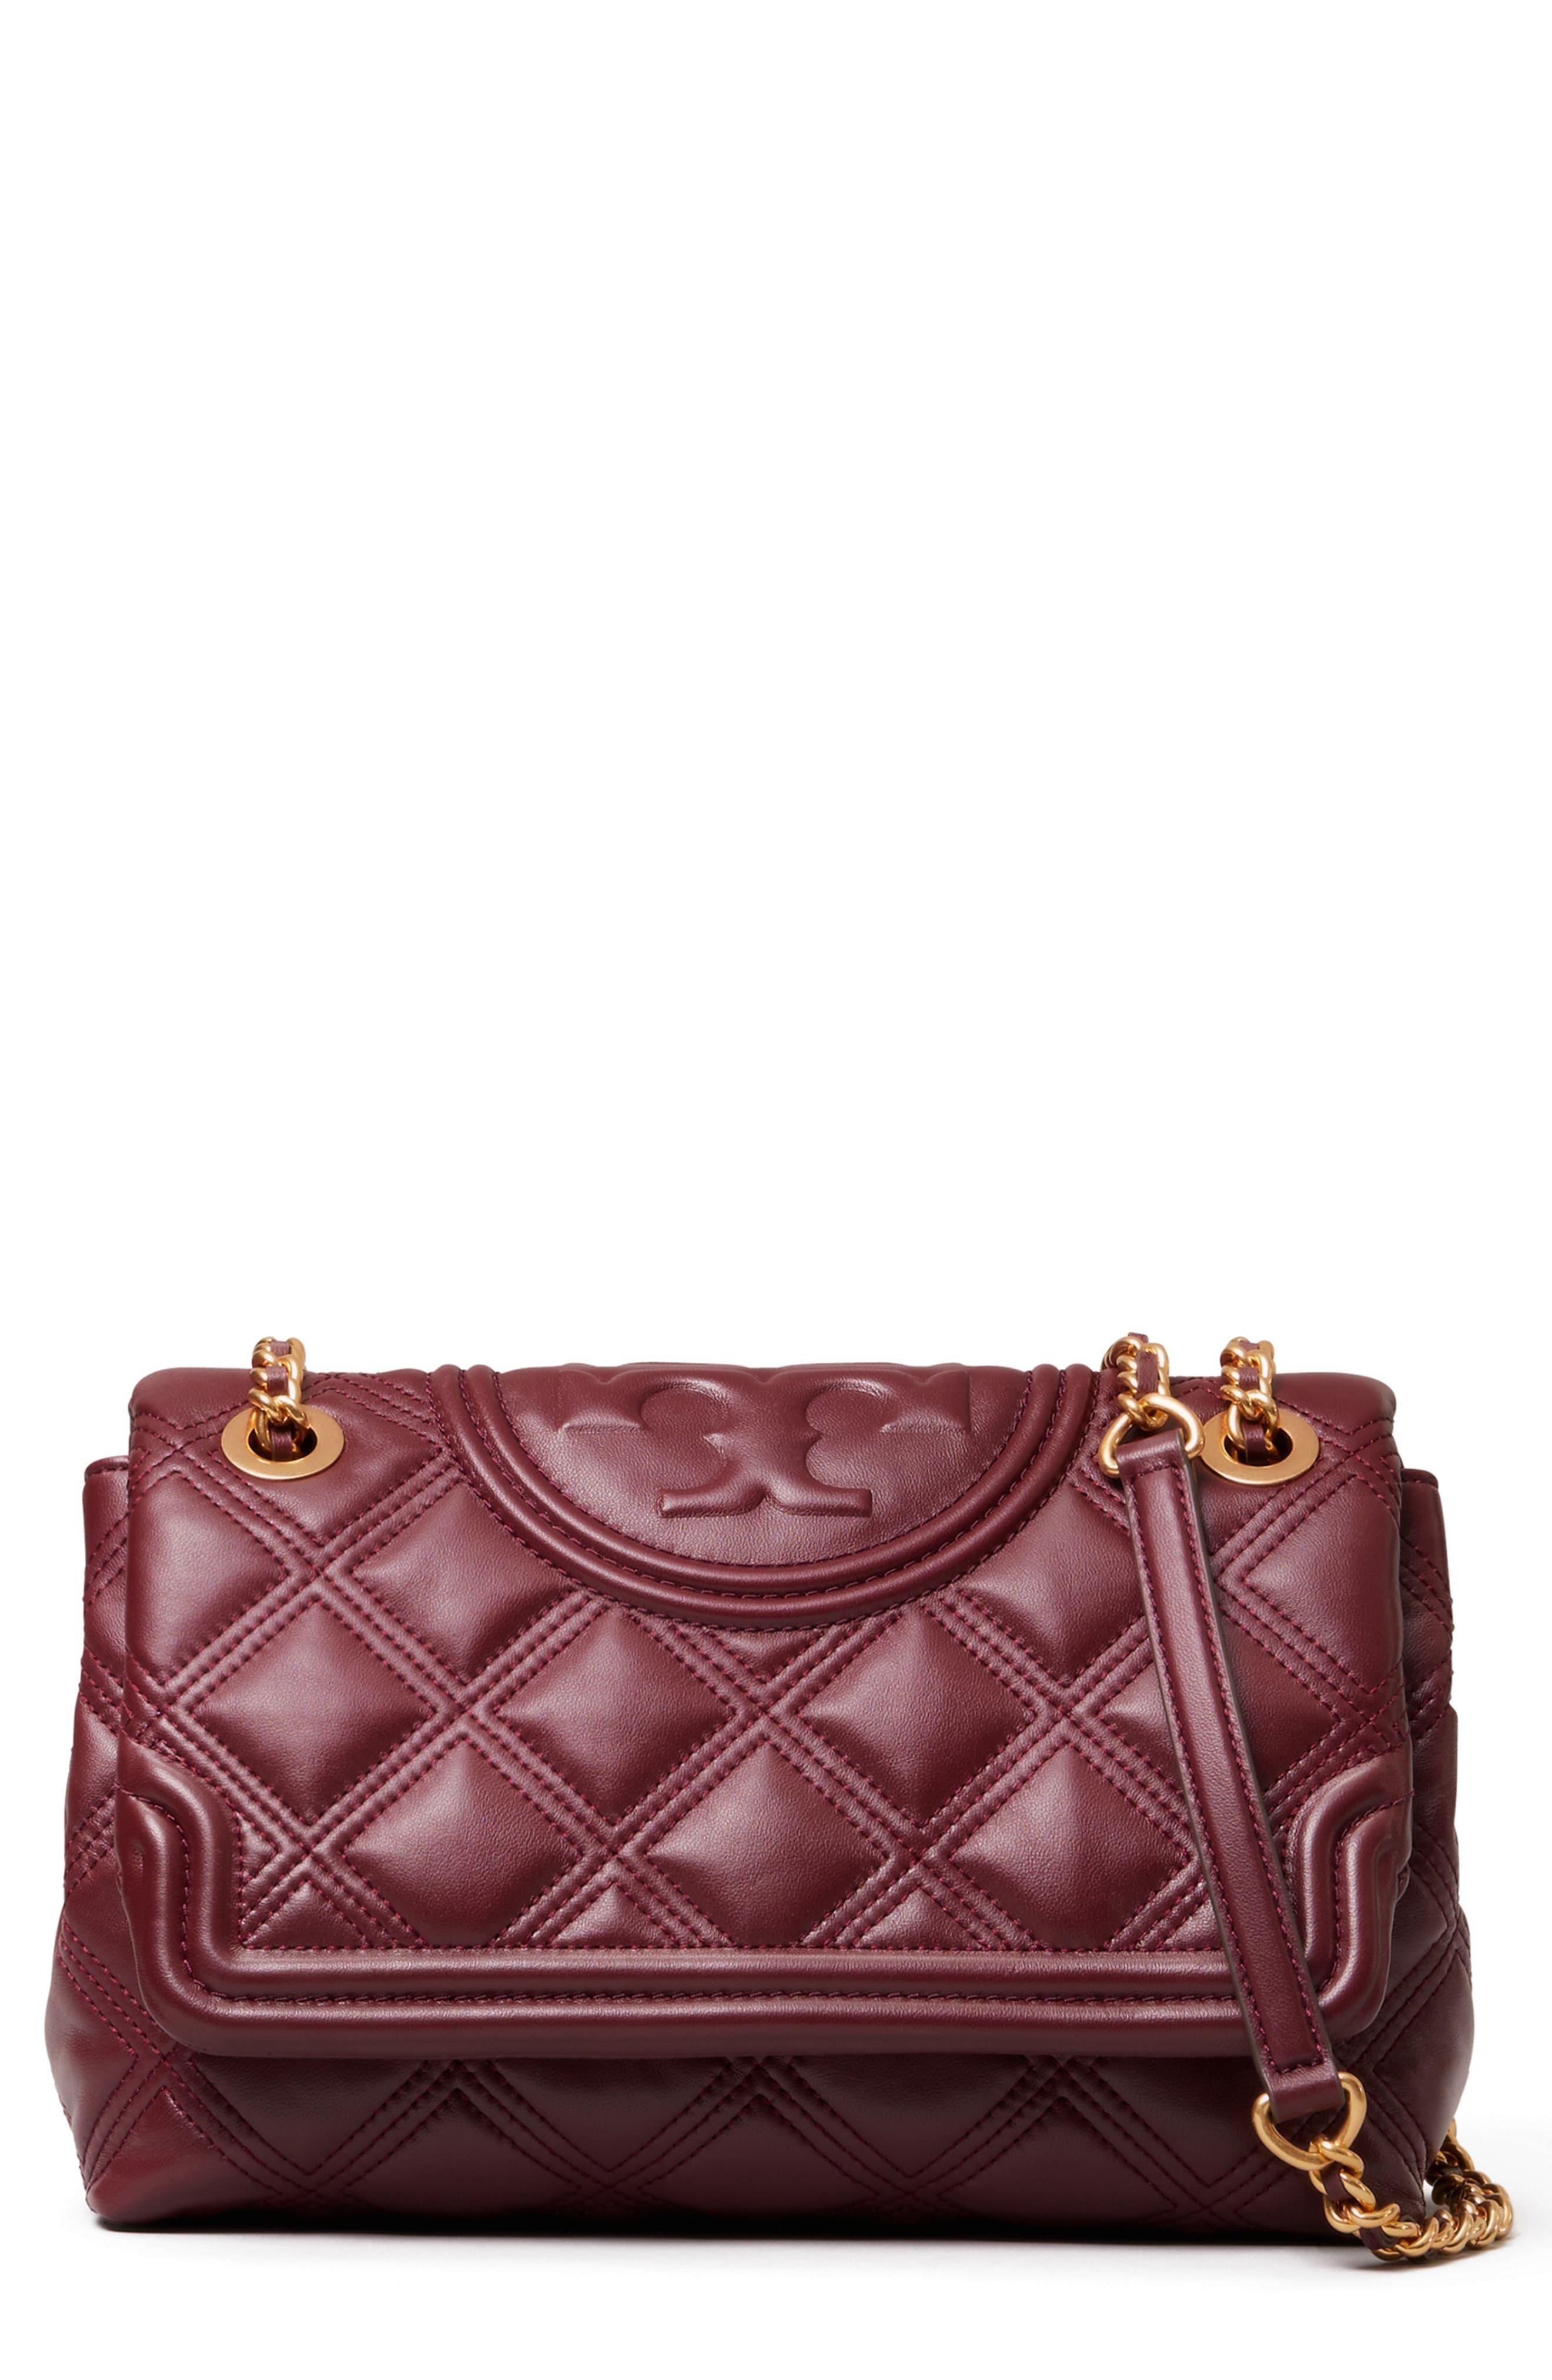 CLEARANCE! TORY BURCH Fleming Soft Tweed Small Convertible Burgundy Shoulder  Bag